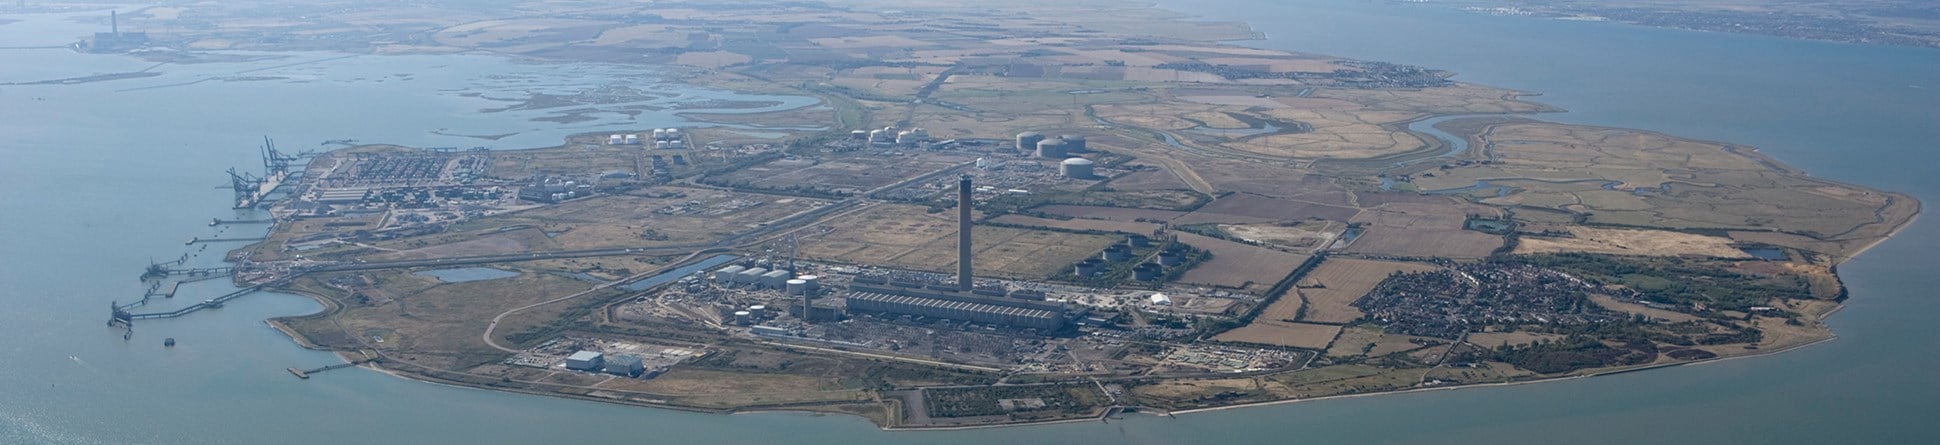 View looking west across the Hoo Peninsula with the Grain industrial area in the foreground.